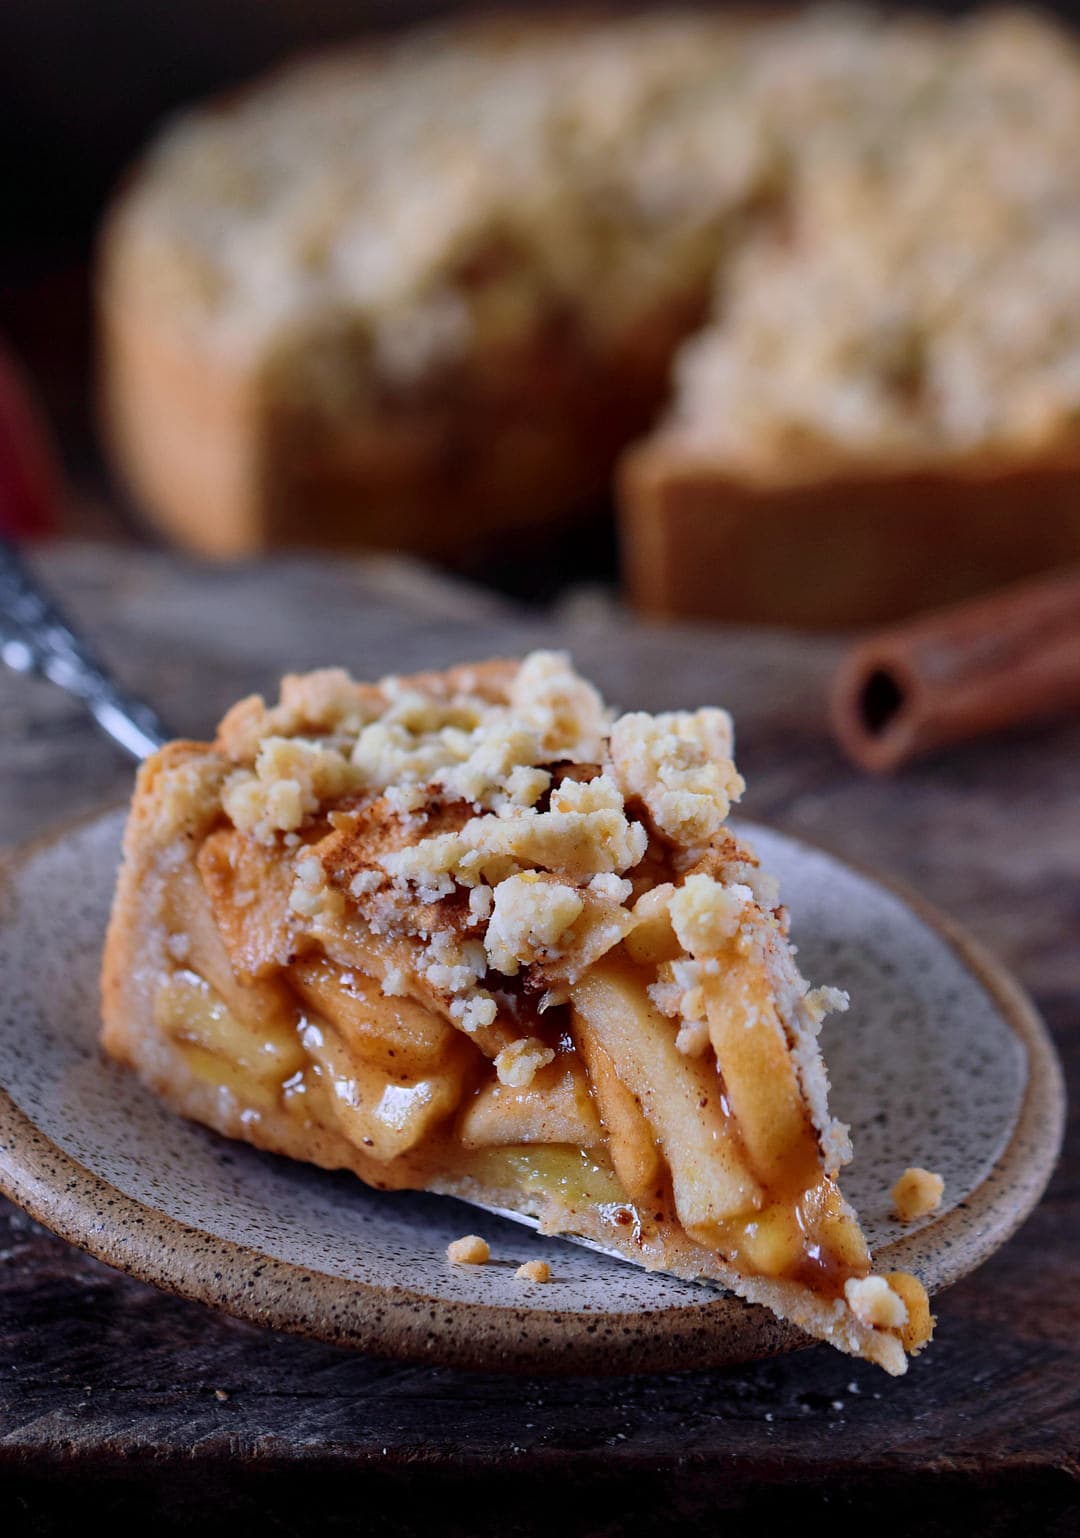 A close up of a piece of vegan apple pie with streusel